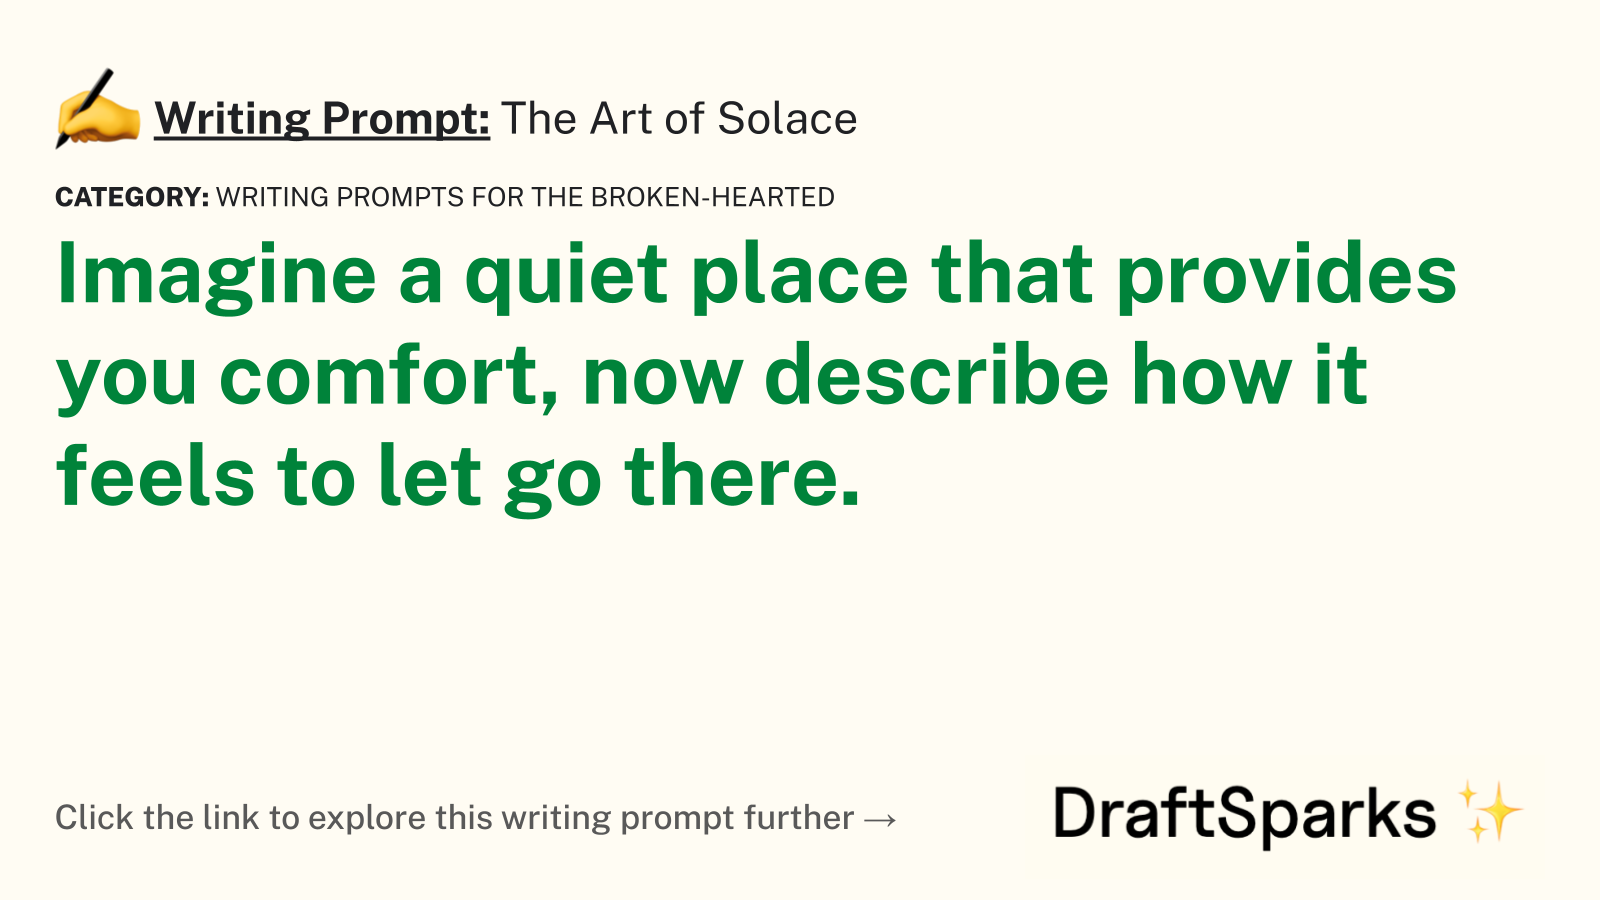 The Art of Solace